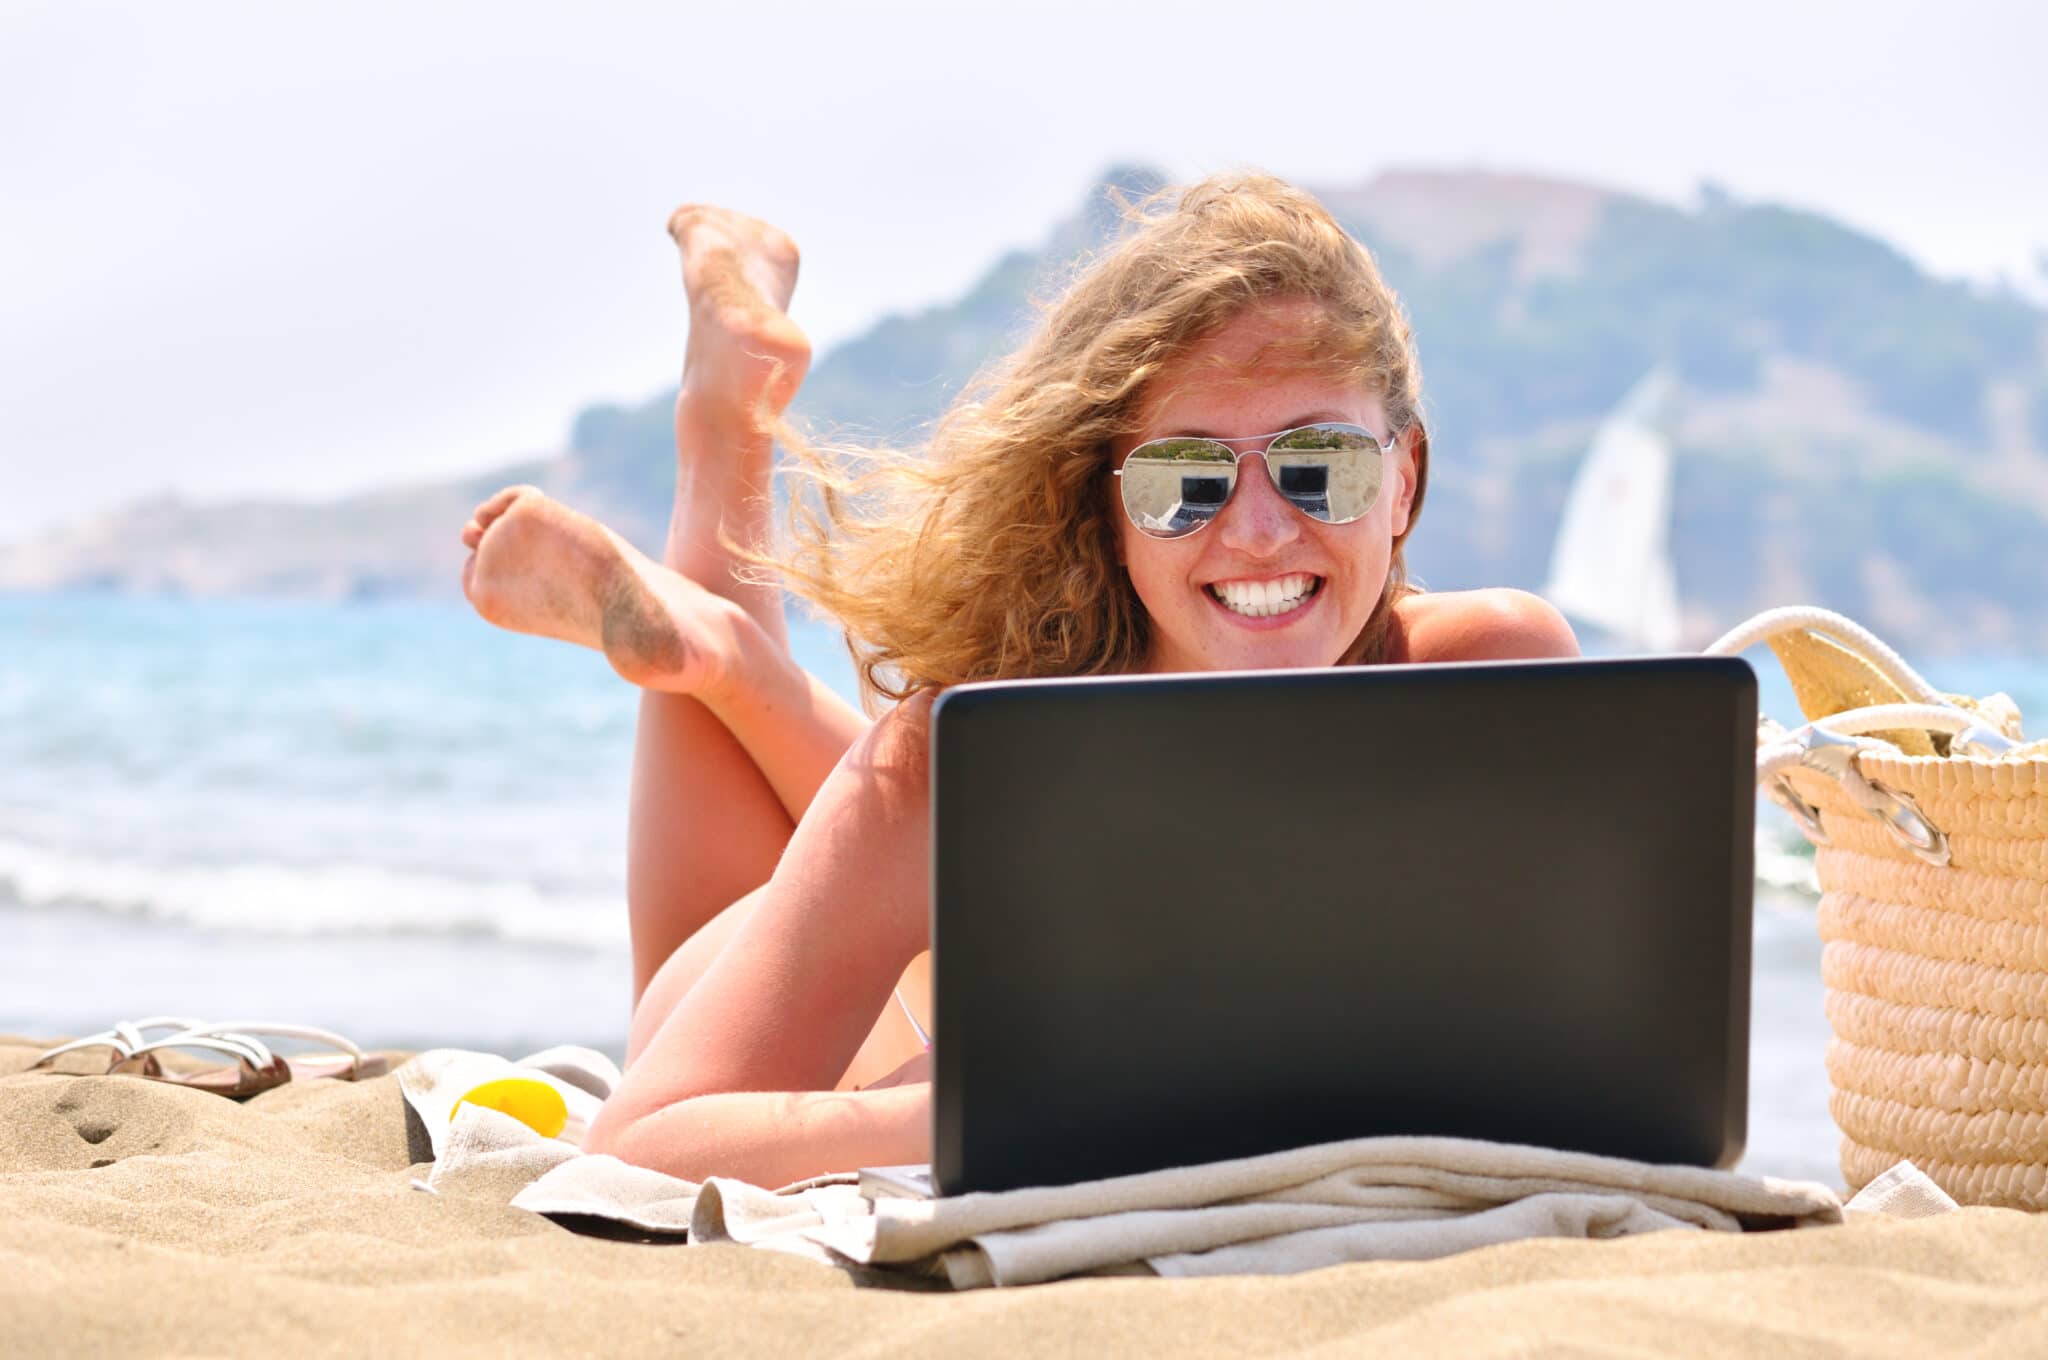 California or New York Business Woman working remotely from Florida Beach as Florida Resident